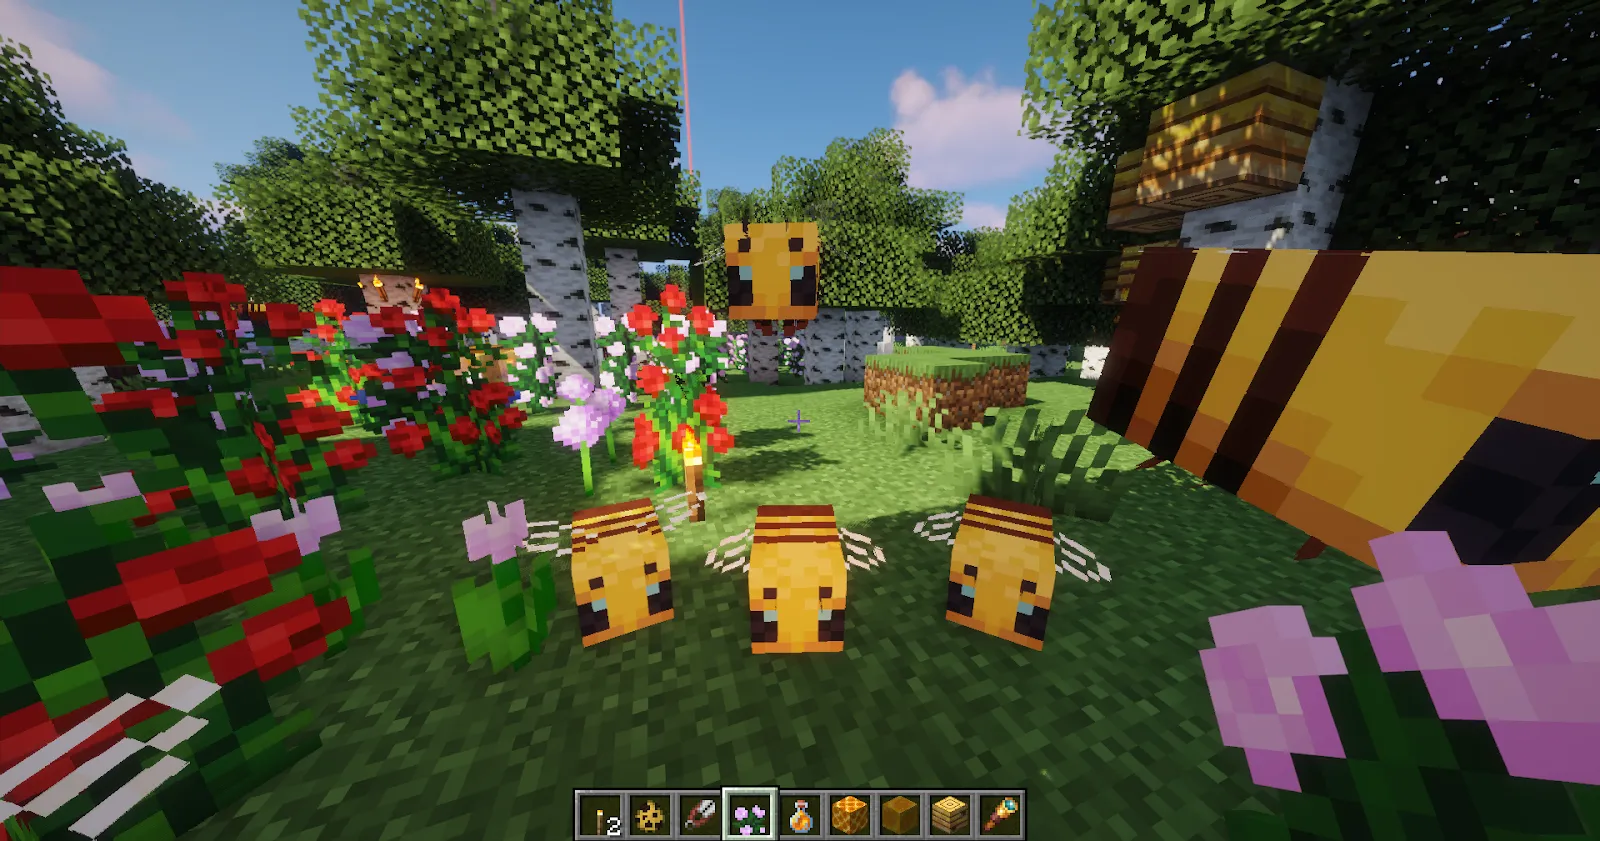 Leading Minecraft Bees with flowers